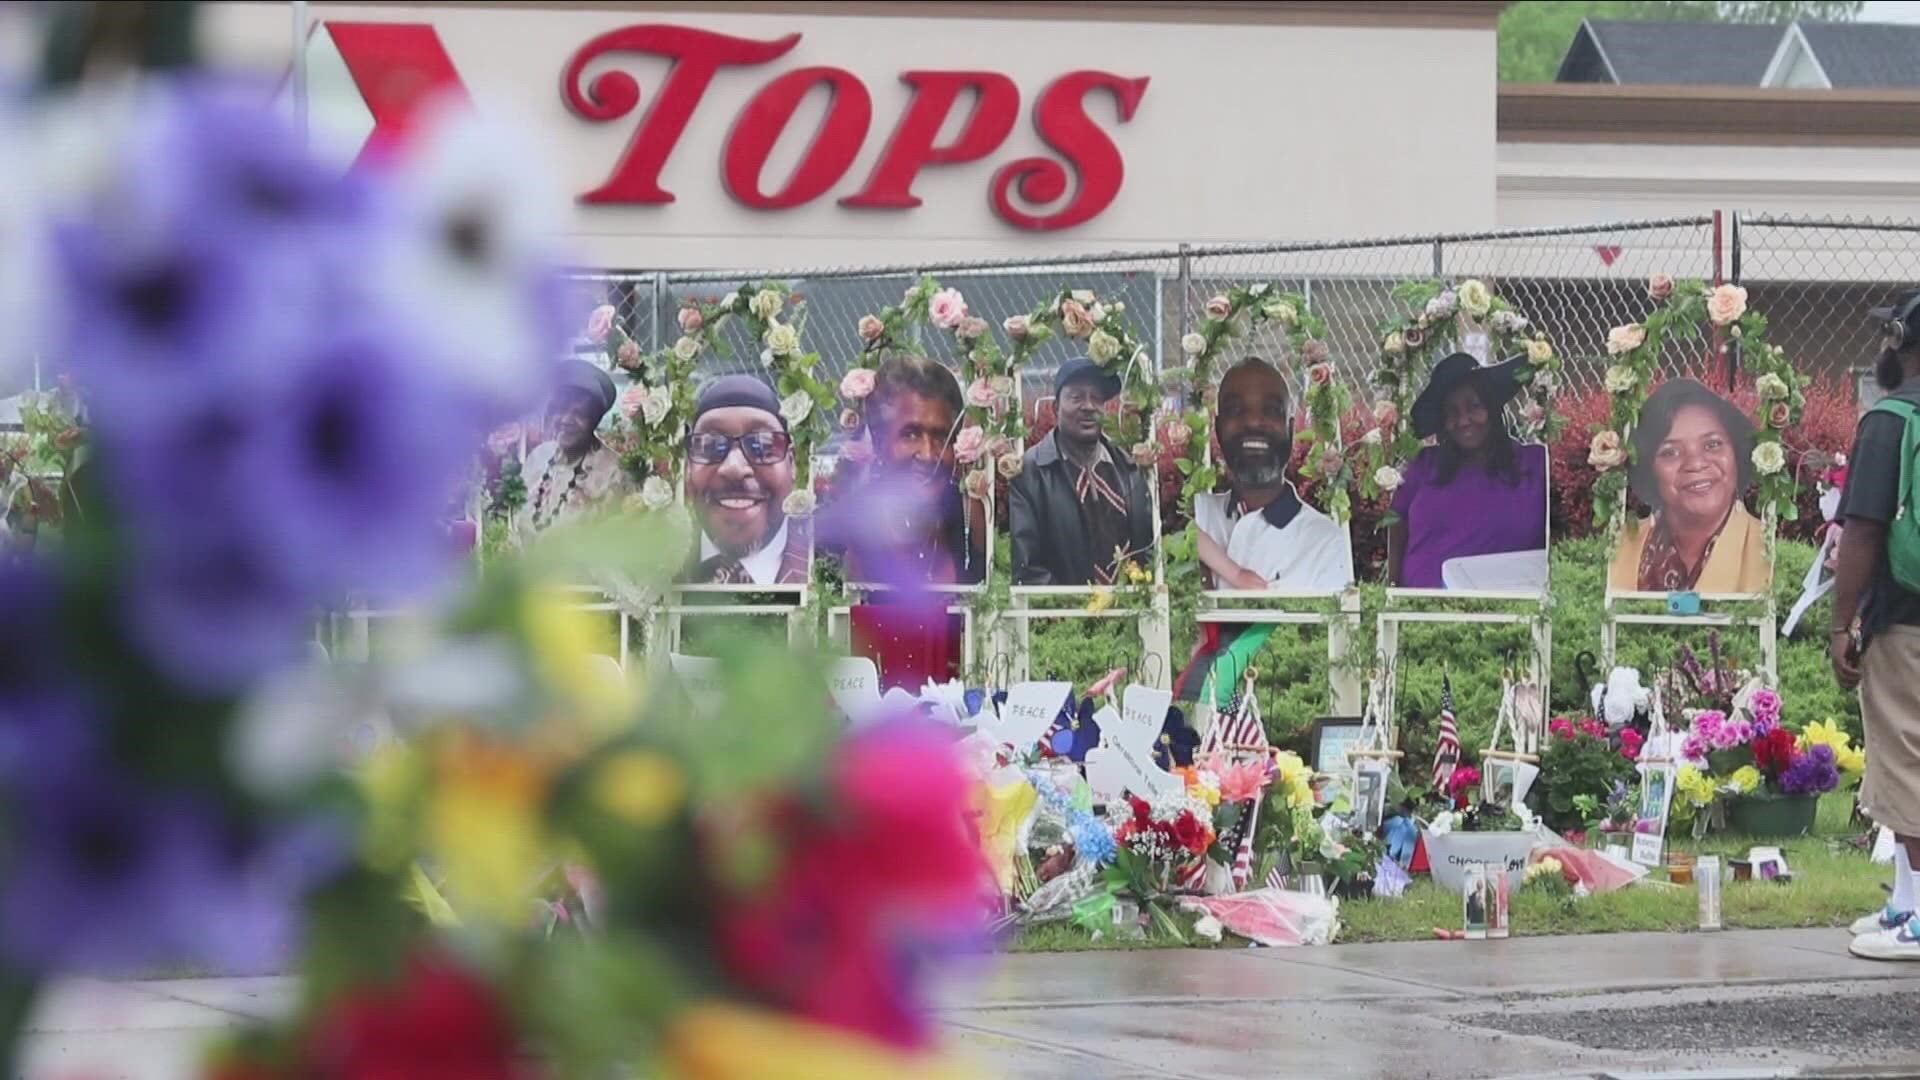 Ten people were killed and three people injured when a gunman walked into the Tops Markets on Jefferson Avenue May 14 and started shooting.